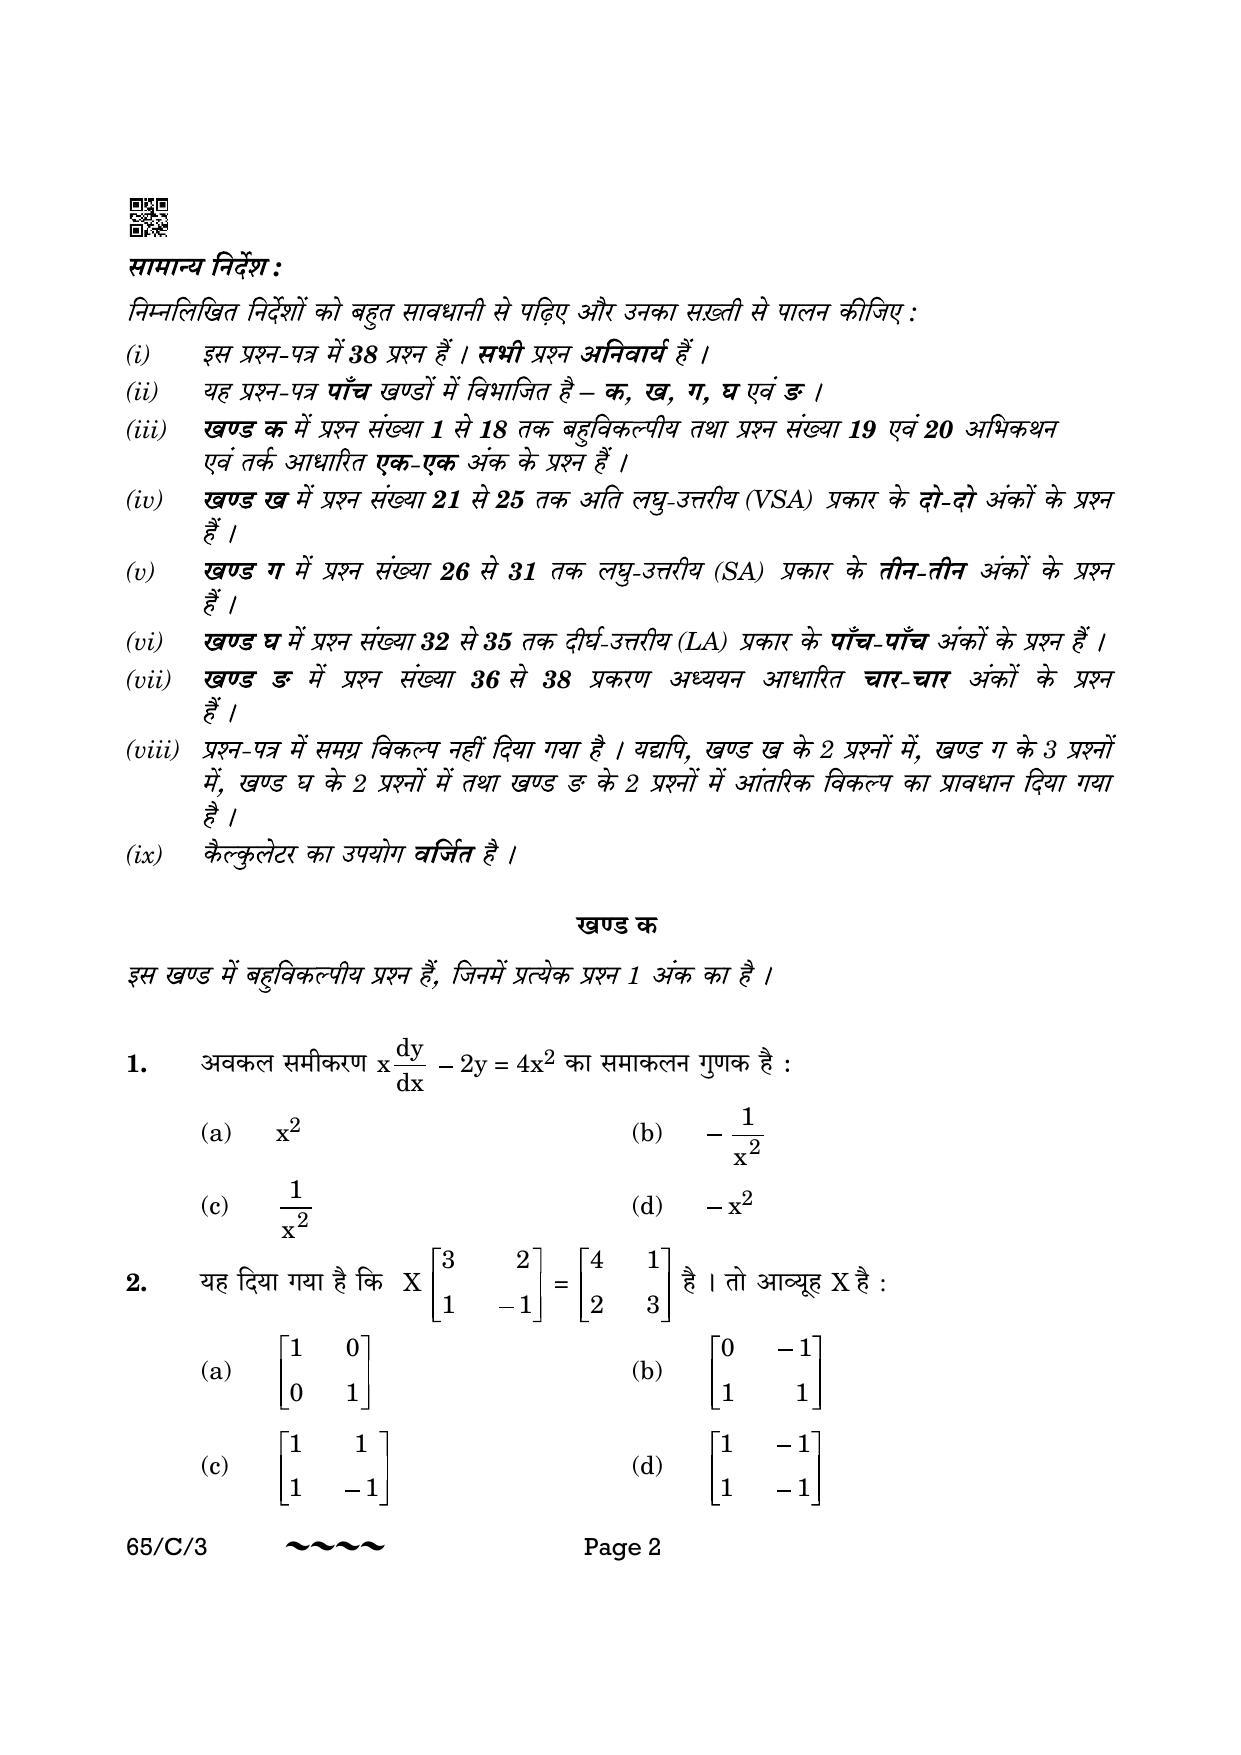 CBSE Class 12 65-3- Mathematics 2023 (Compartment) Question Paper - Page 2